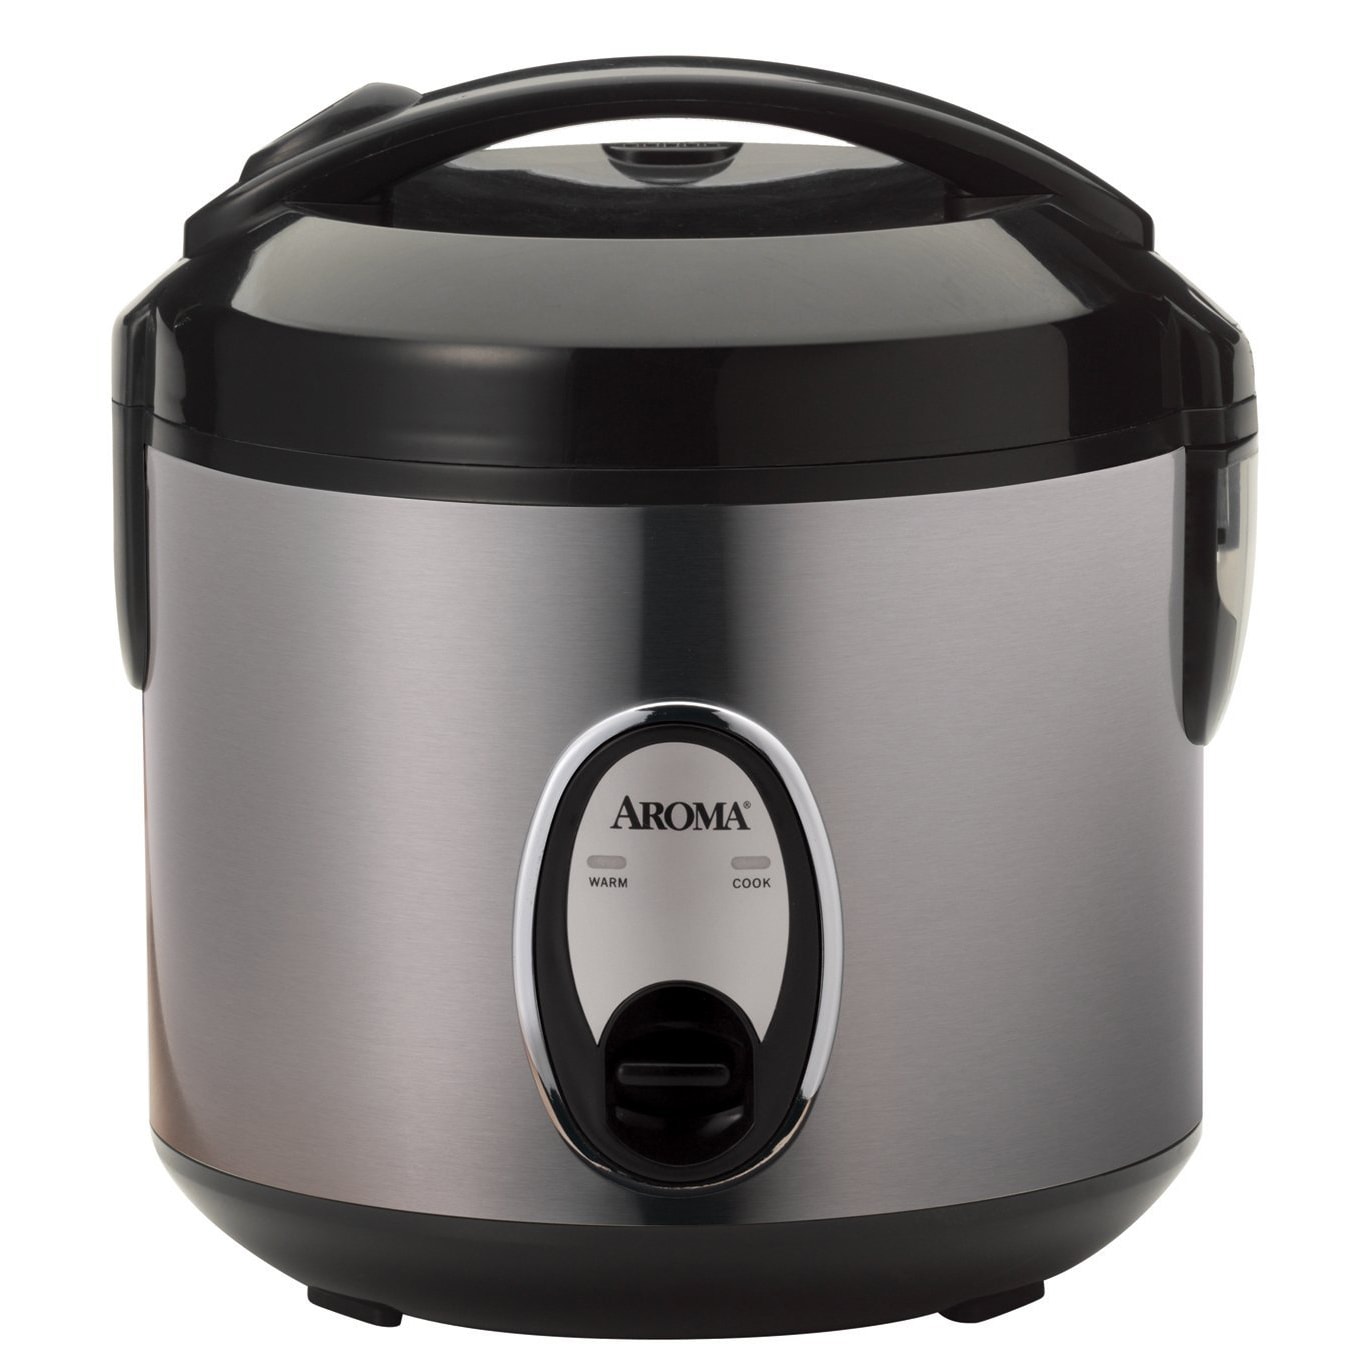 https://ak1.ostkcdn.com/images/products/7555559/Aroma-8-cup-Rice-Cooker-a3c54db7-9809-4c57-b7c8-34a762067013.jpg